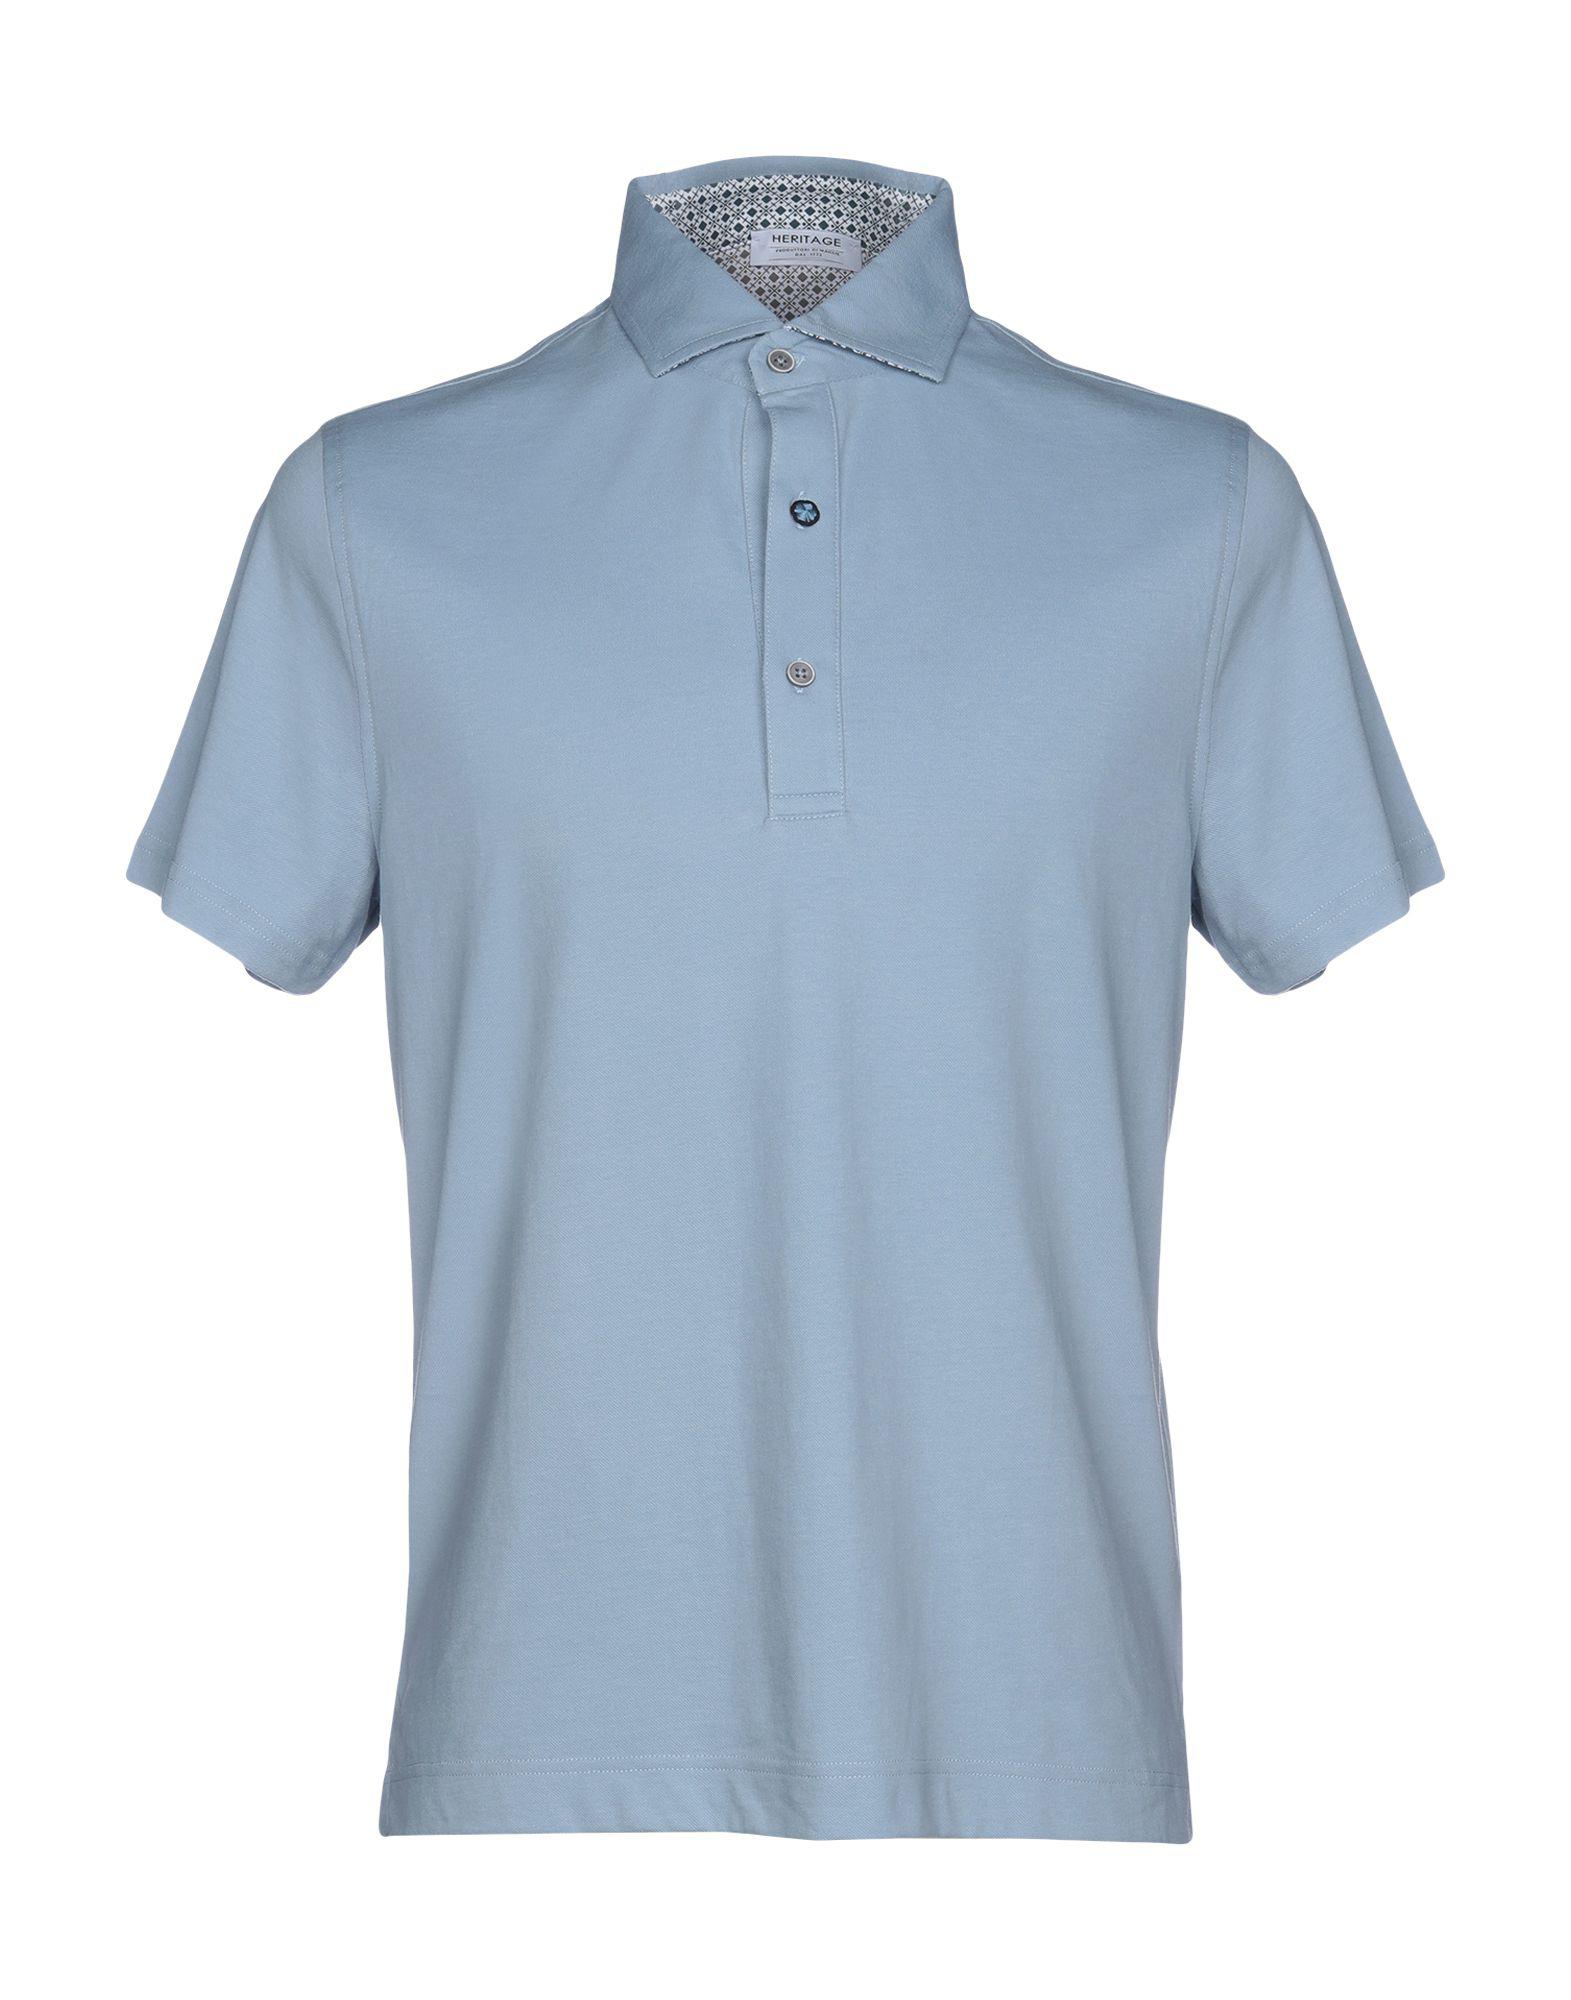 Heritage Cotton Polo Shirt in Sky Blue (Blue) for Men - Lyst